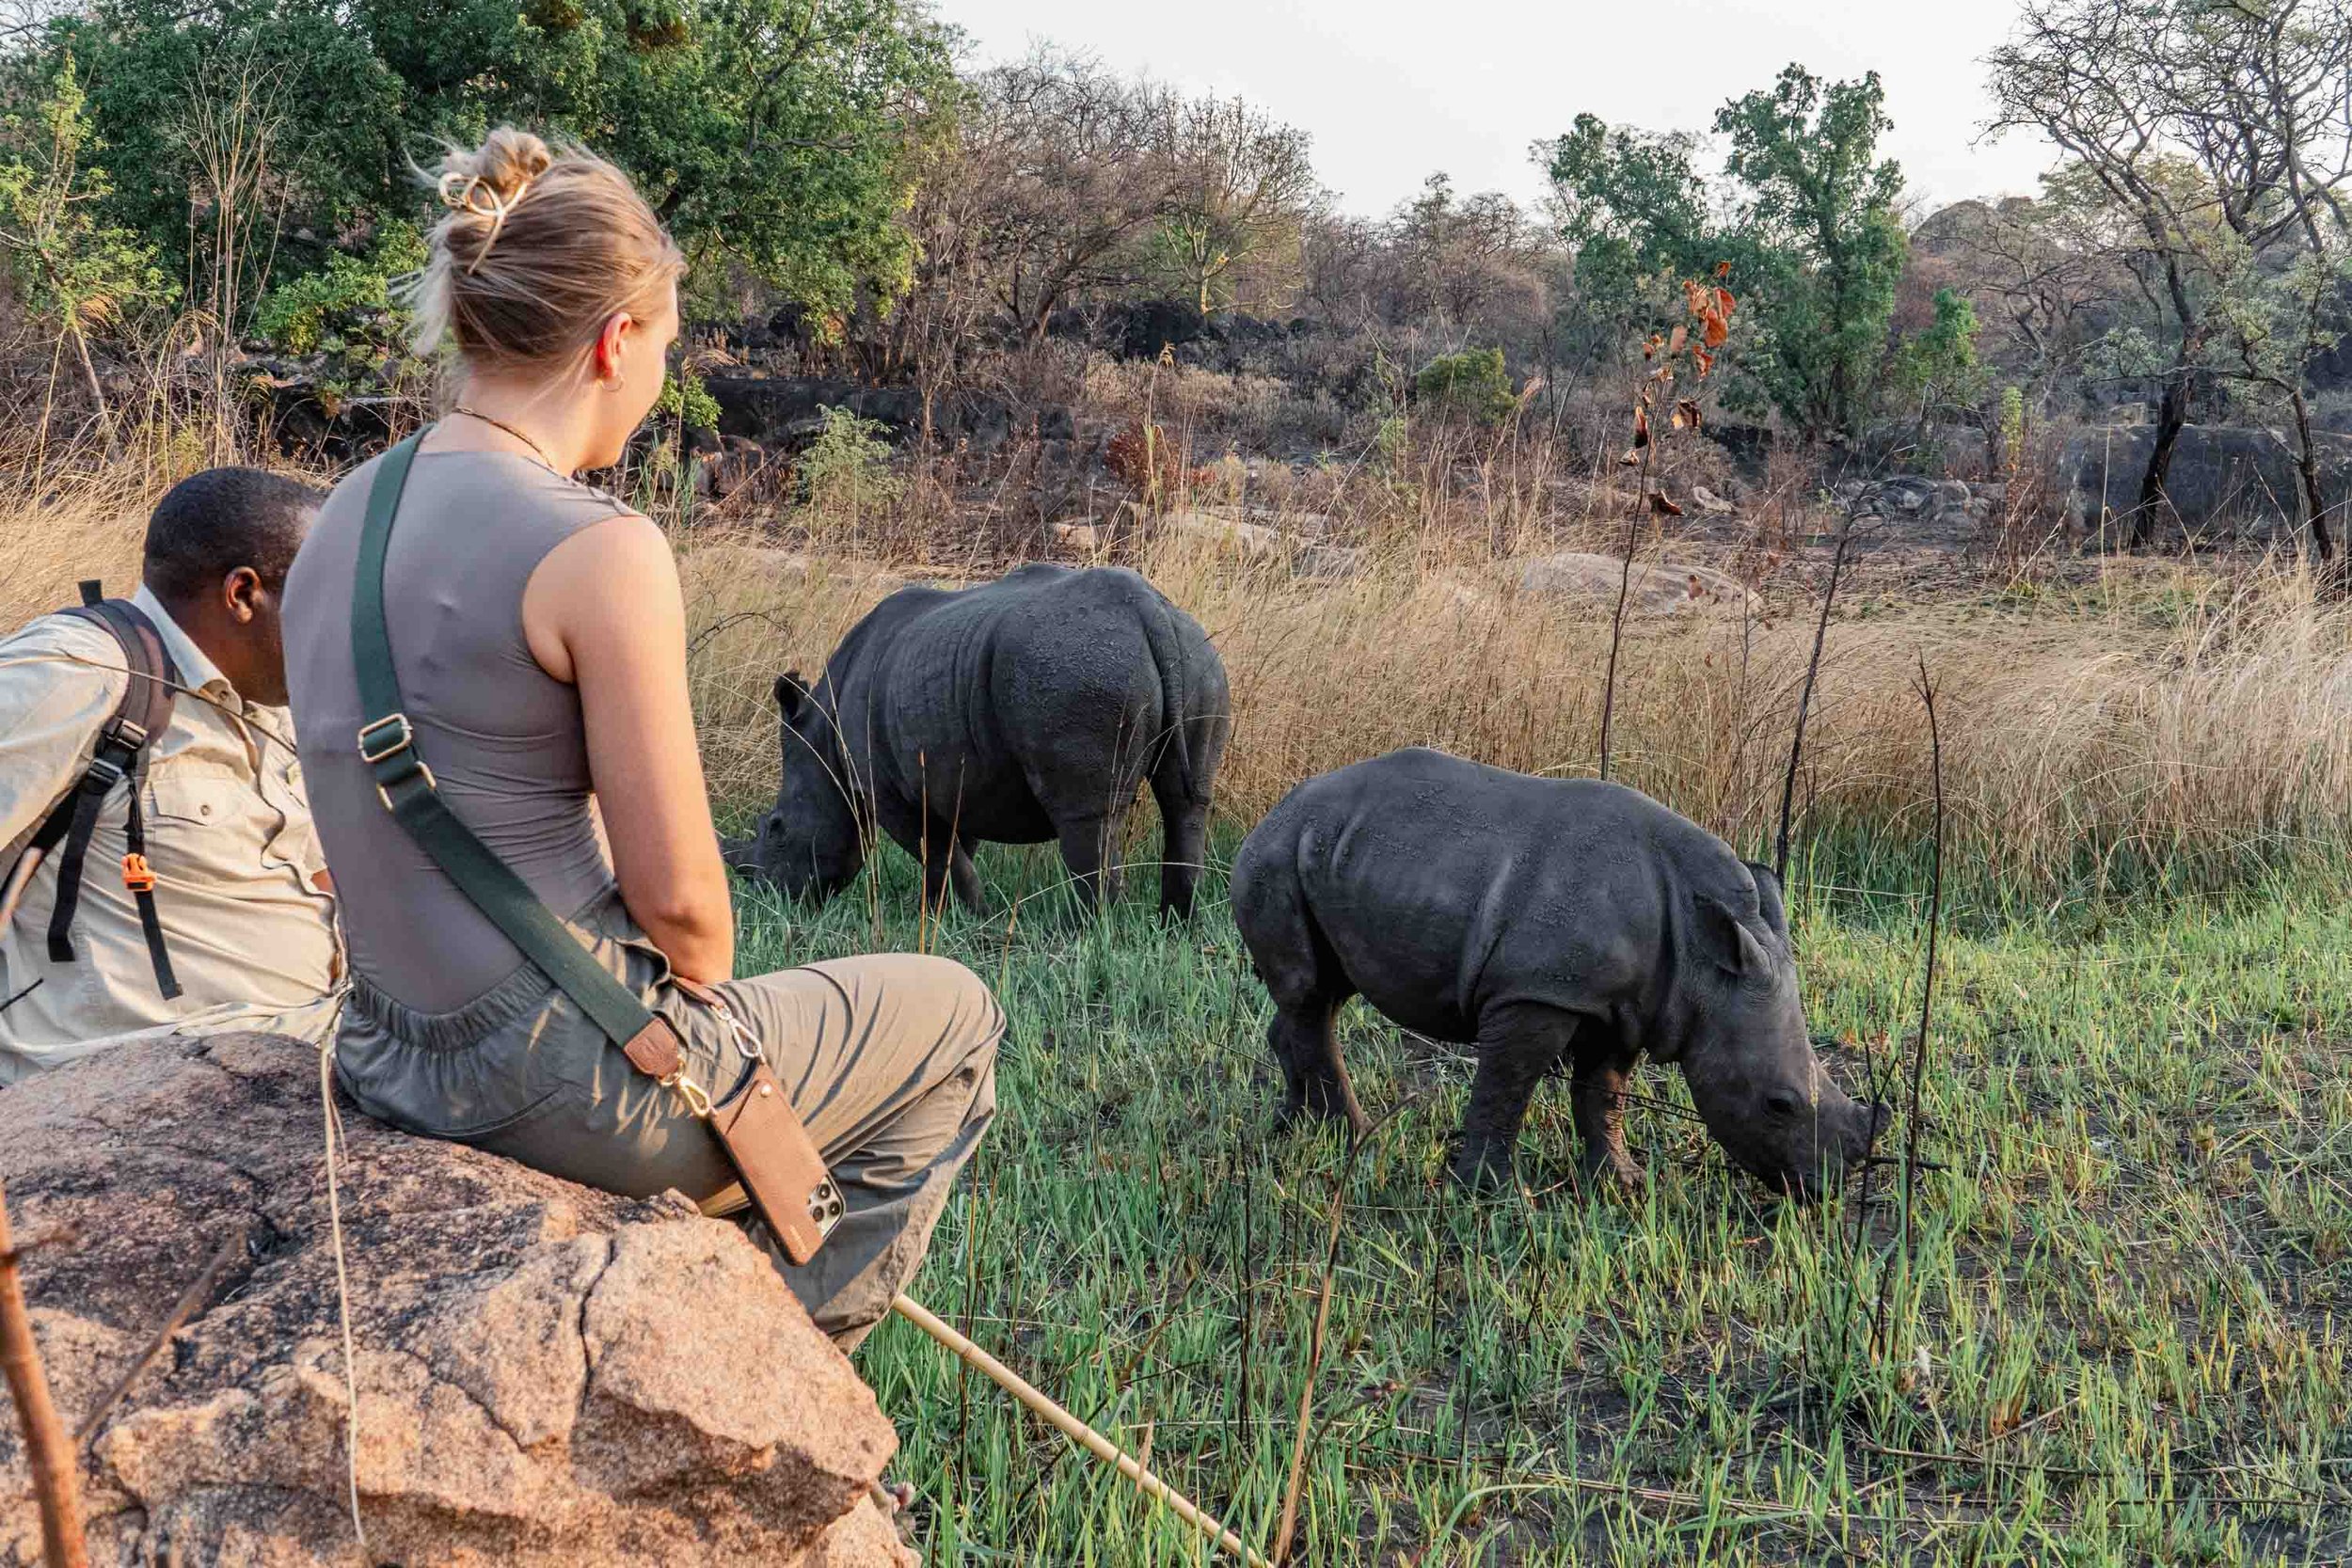 Two persons looking at the rhinos eating in the field.